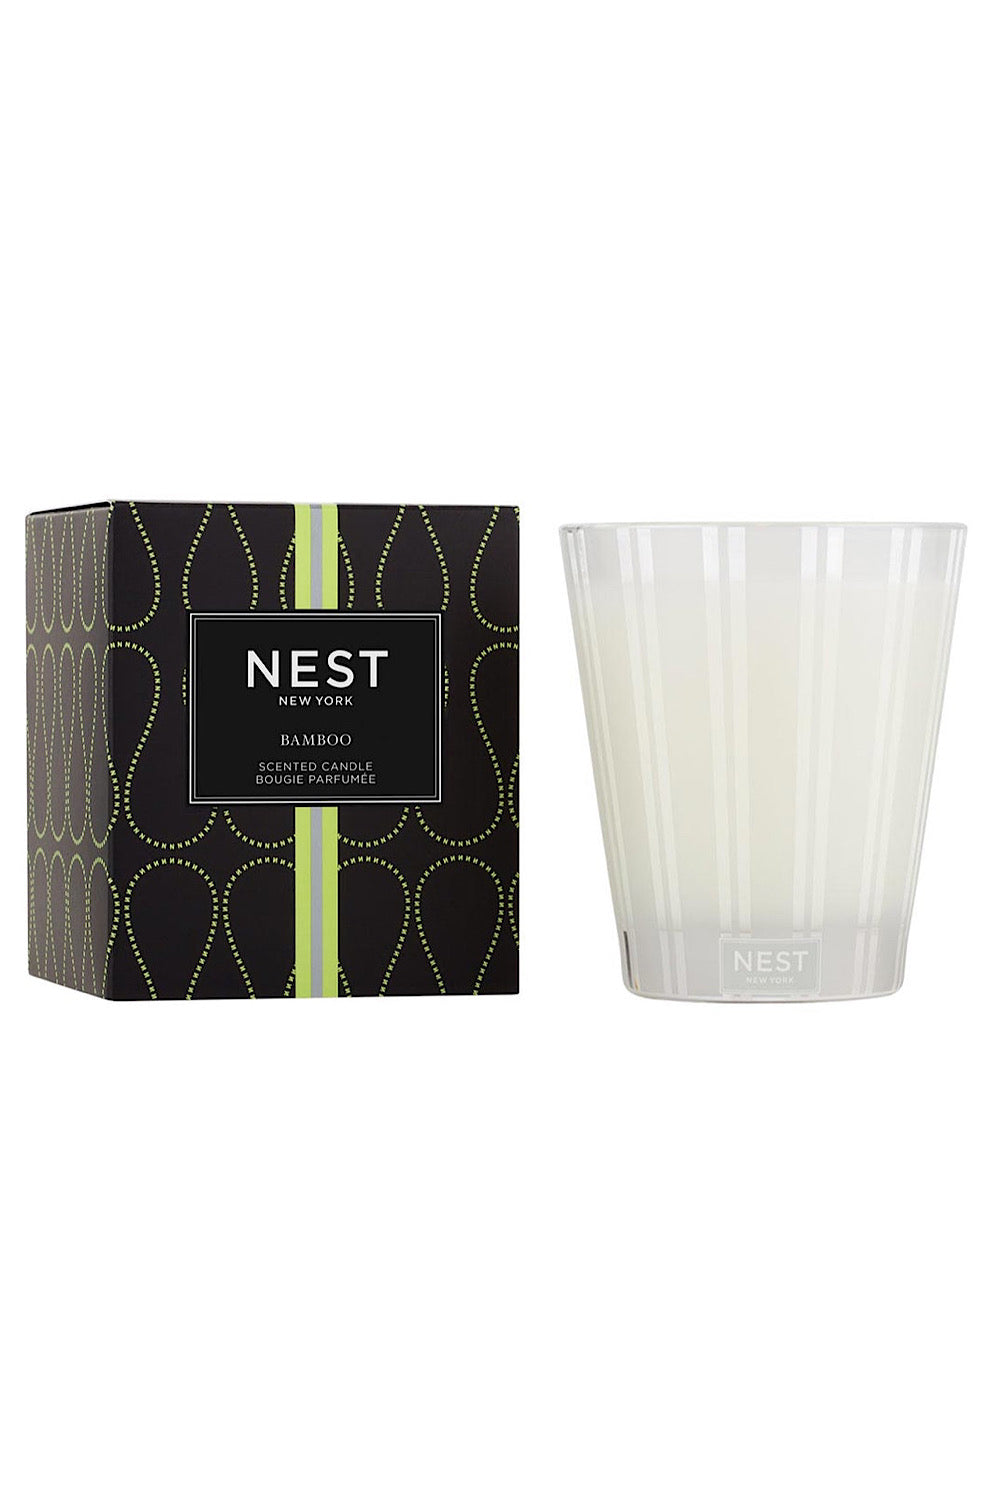 NEST BAMBOO CANDLE CLASSIC